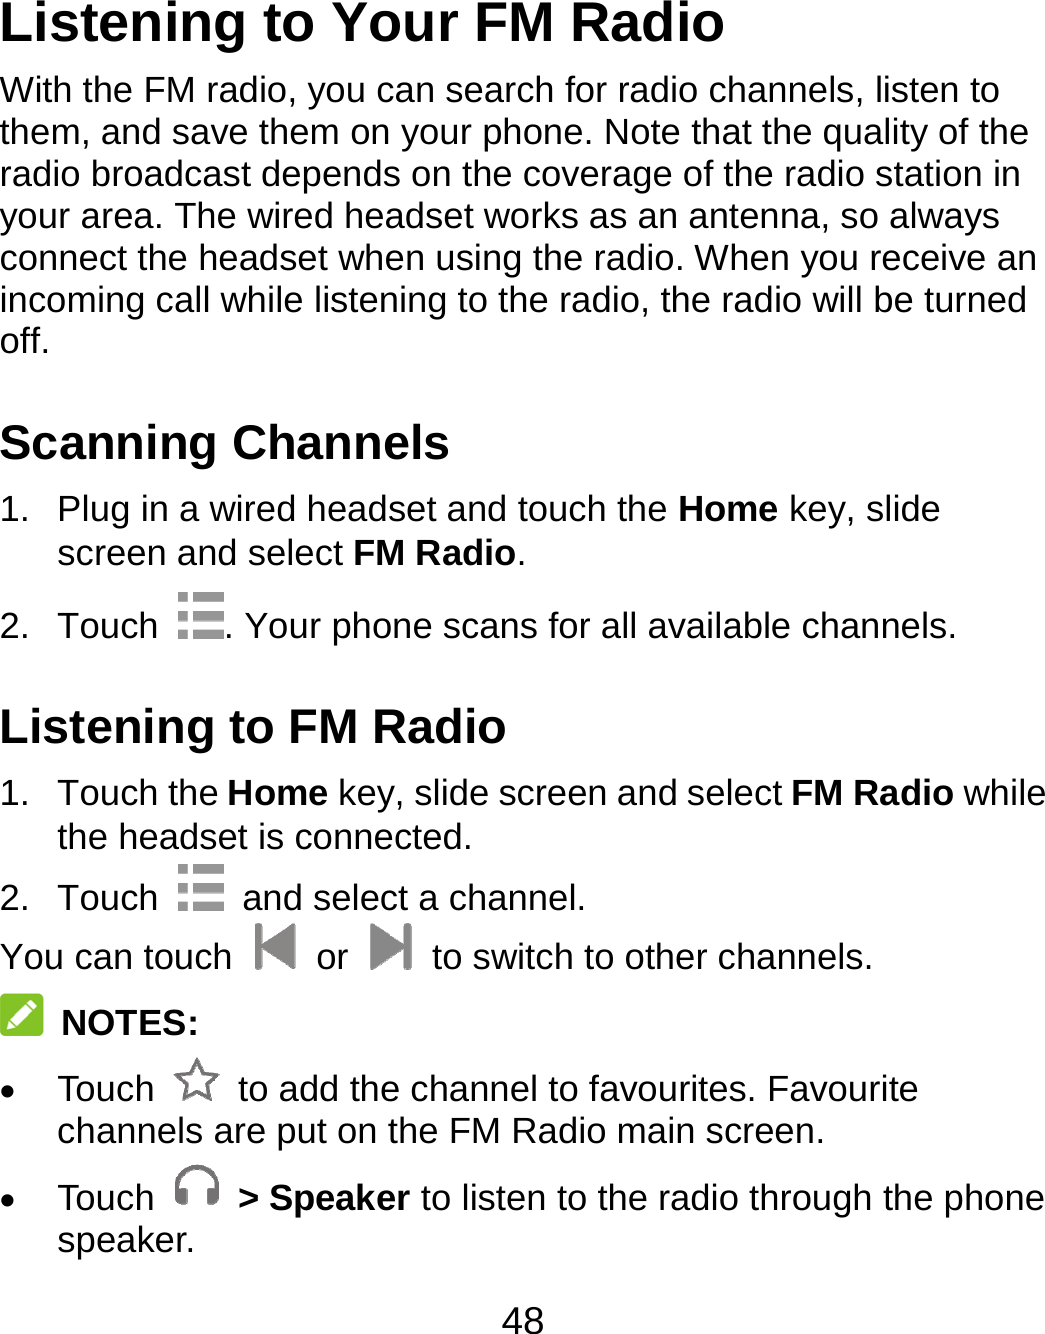 48 Listening to Your FM Radio With the FM radio, you can search for radio channels, listen to them, and save them on your phone. Note that the quality of the radio broadcast depends on the coverage of the radio station in your area. The wired headset works as an antenna, so always connect the headset when using the radio. When you receive an incoming call while listening to the radio, the radio will be turned off.  Scanning Channels 1.  Plug in a wired headset and touch the Home key, slide screen and select FM Radio. 2. Touch  . Your phone scans for all available channels. Listening to FM Radio 1. Touch the Home key, slide screen and select FM Radio while the headset is connected. 2. Touch    and select a channel. You can touch   or    to switch to other channels.  NOTES:  Touch    to add the channel to favourites. Favourite channels are put on the FM Radio main screen.    Touch   &gt; Speaker to listen to the radio through the phone speaker. 